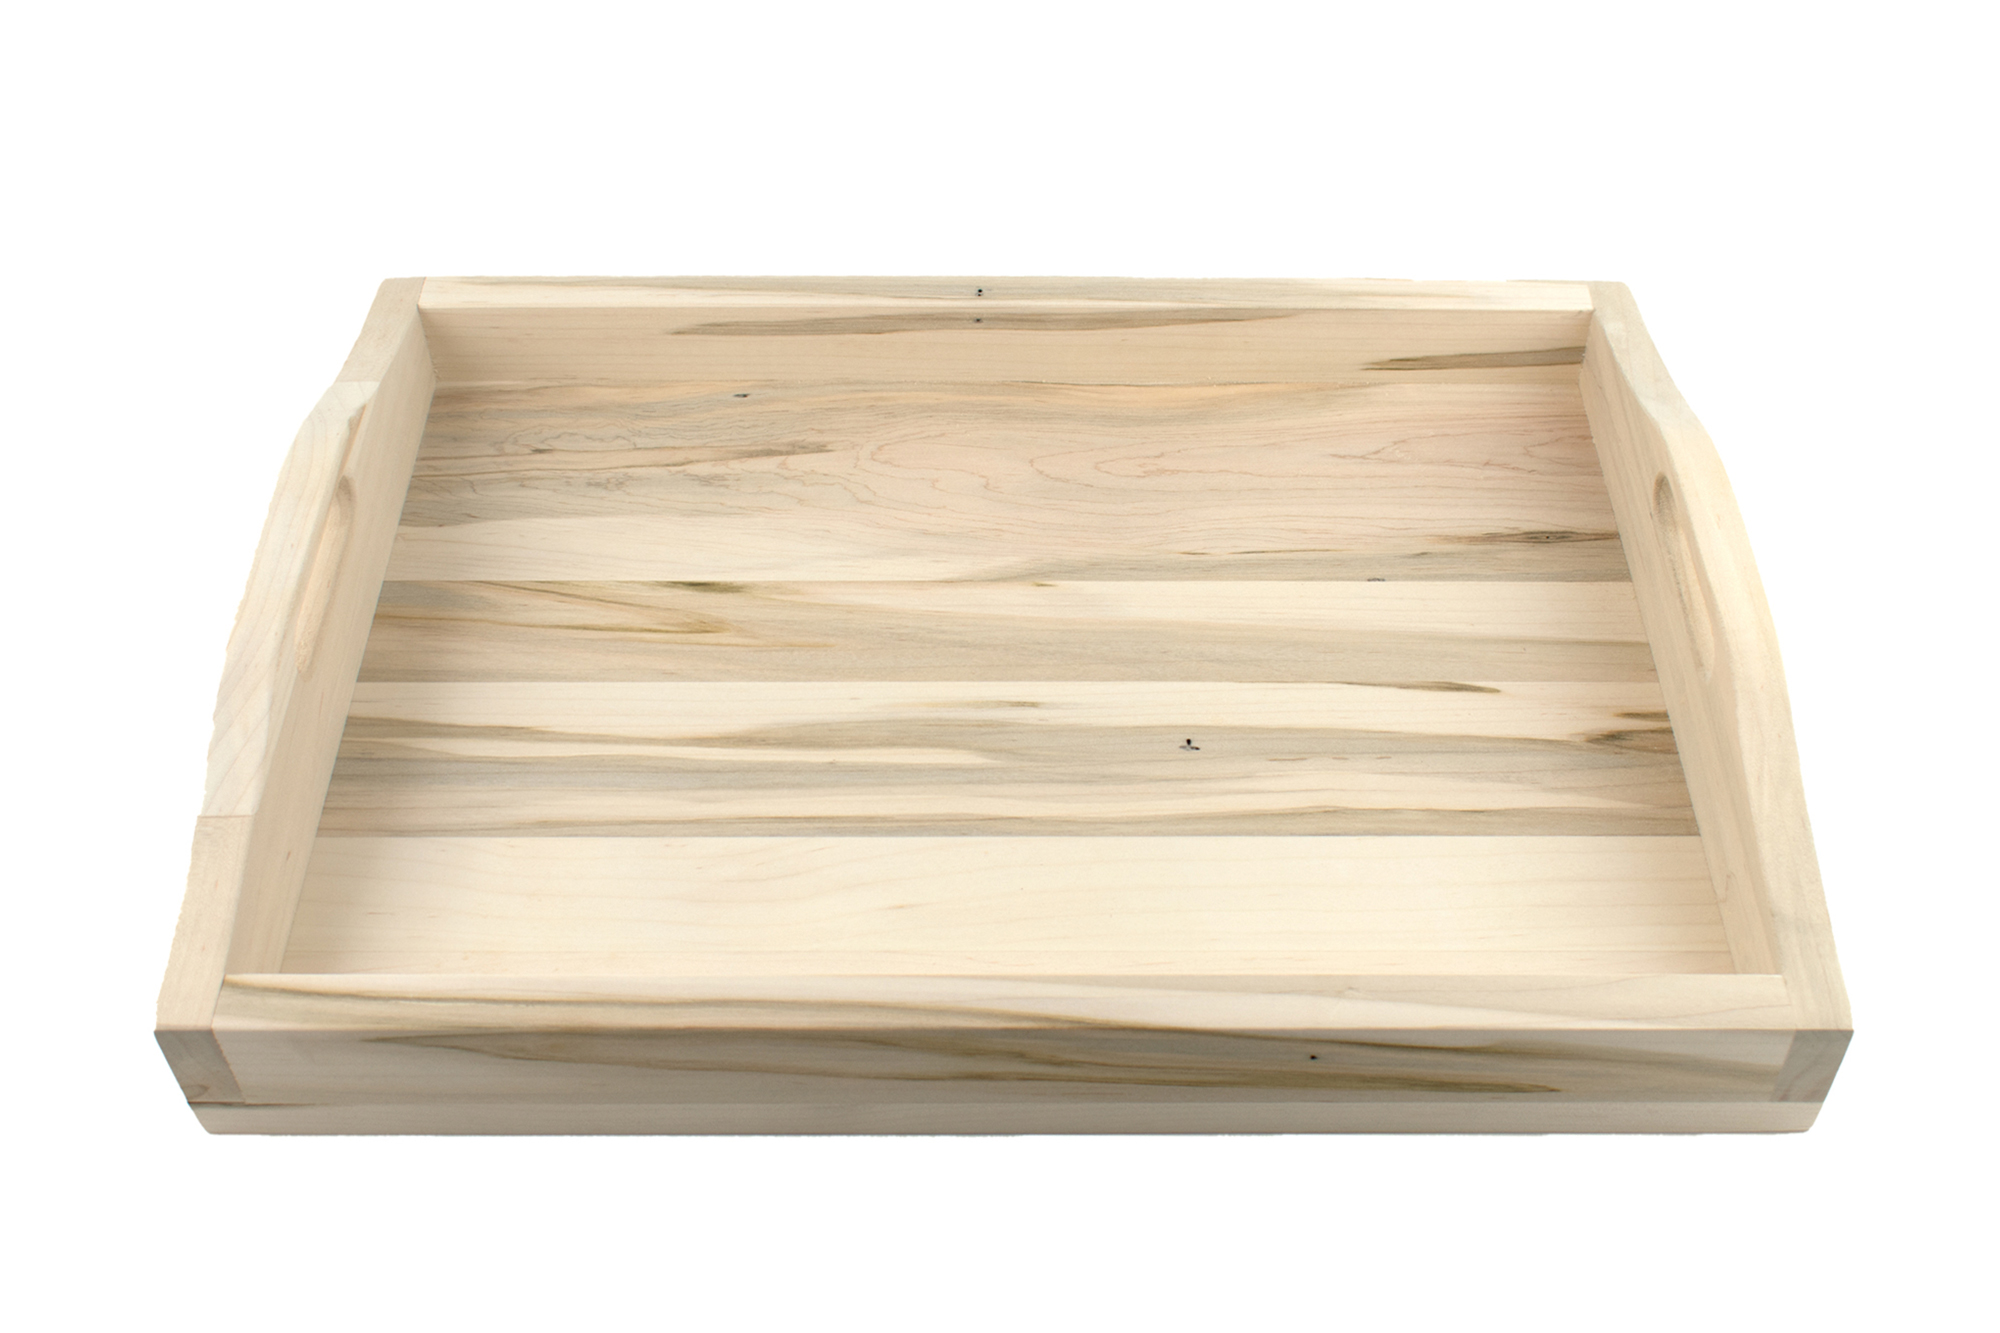 Large Wormy Maple Hardwood Tray with Handles